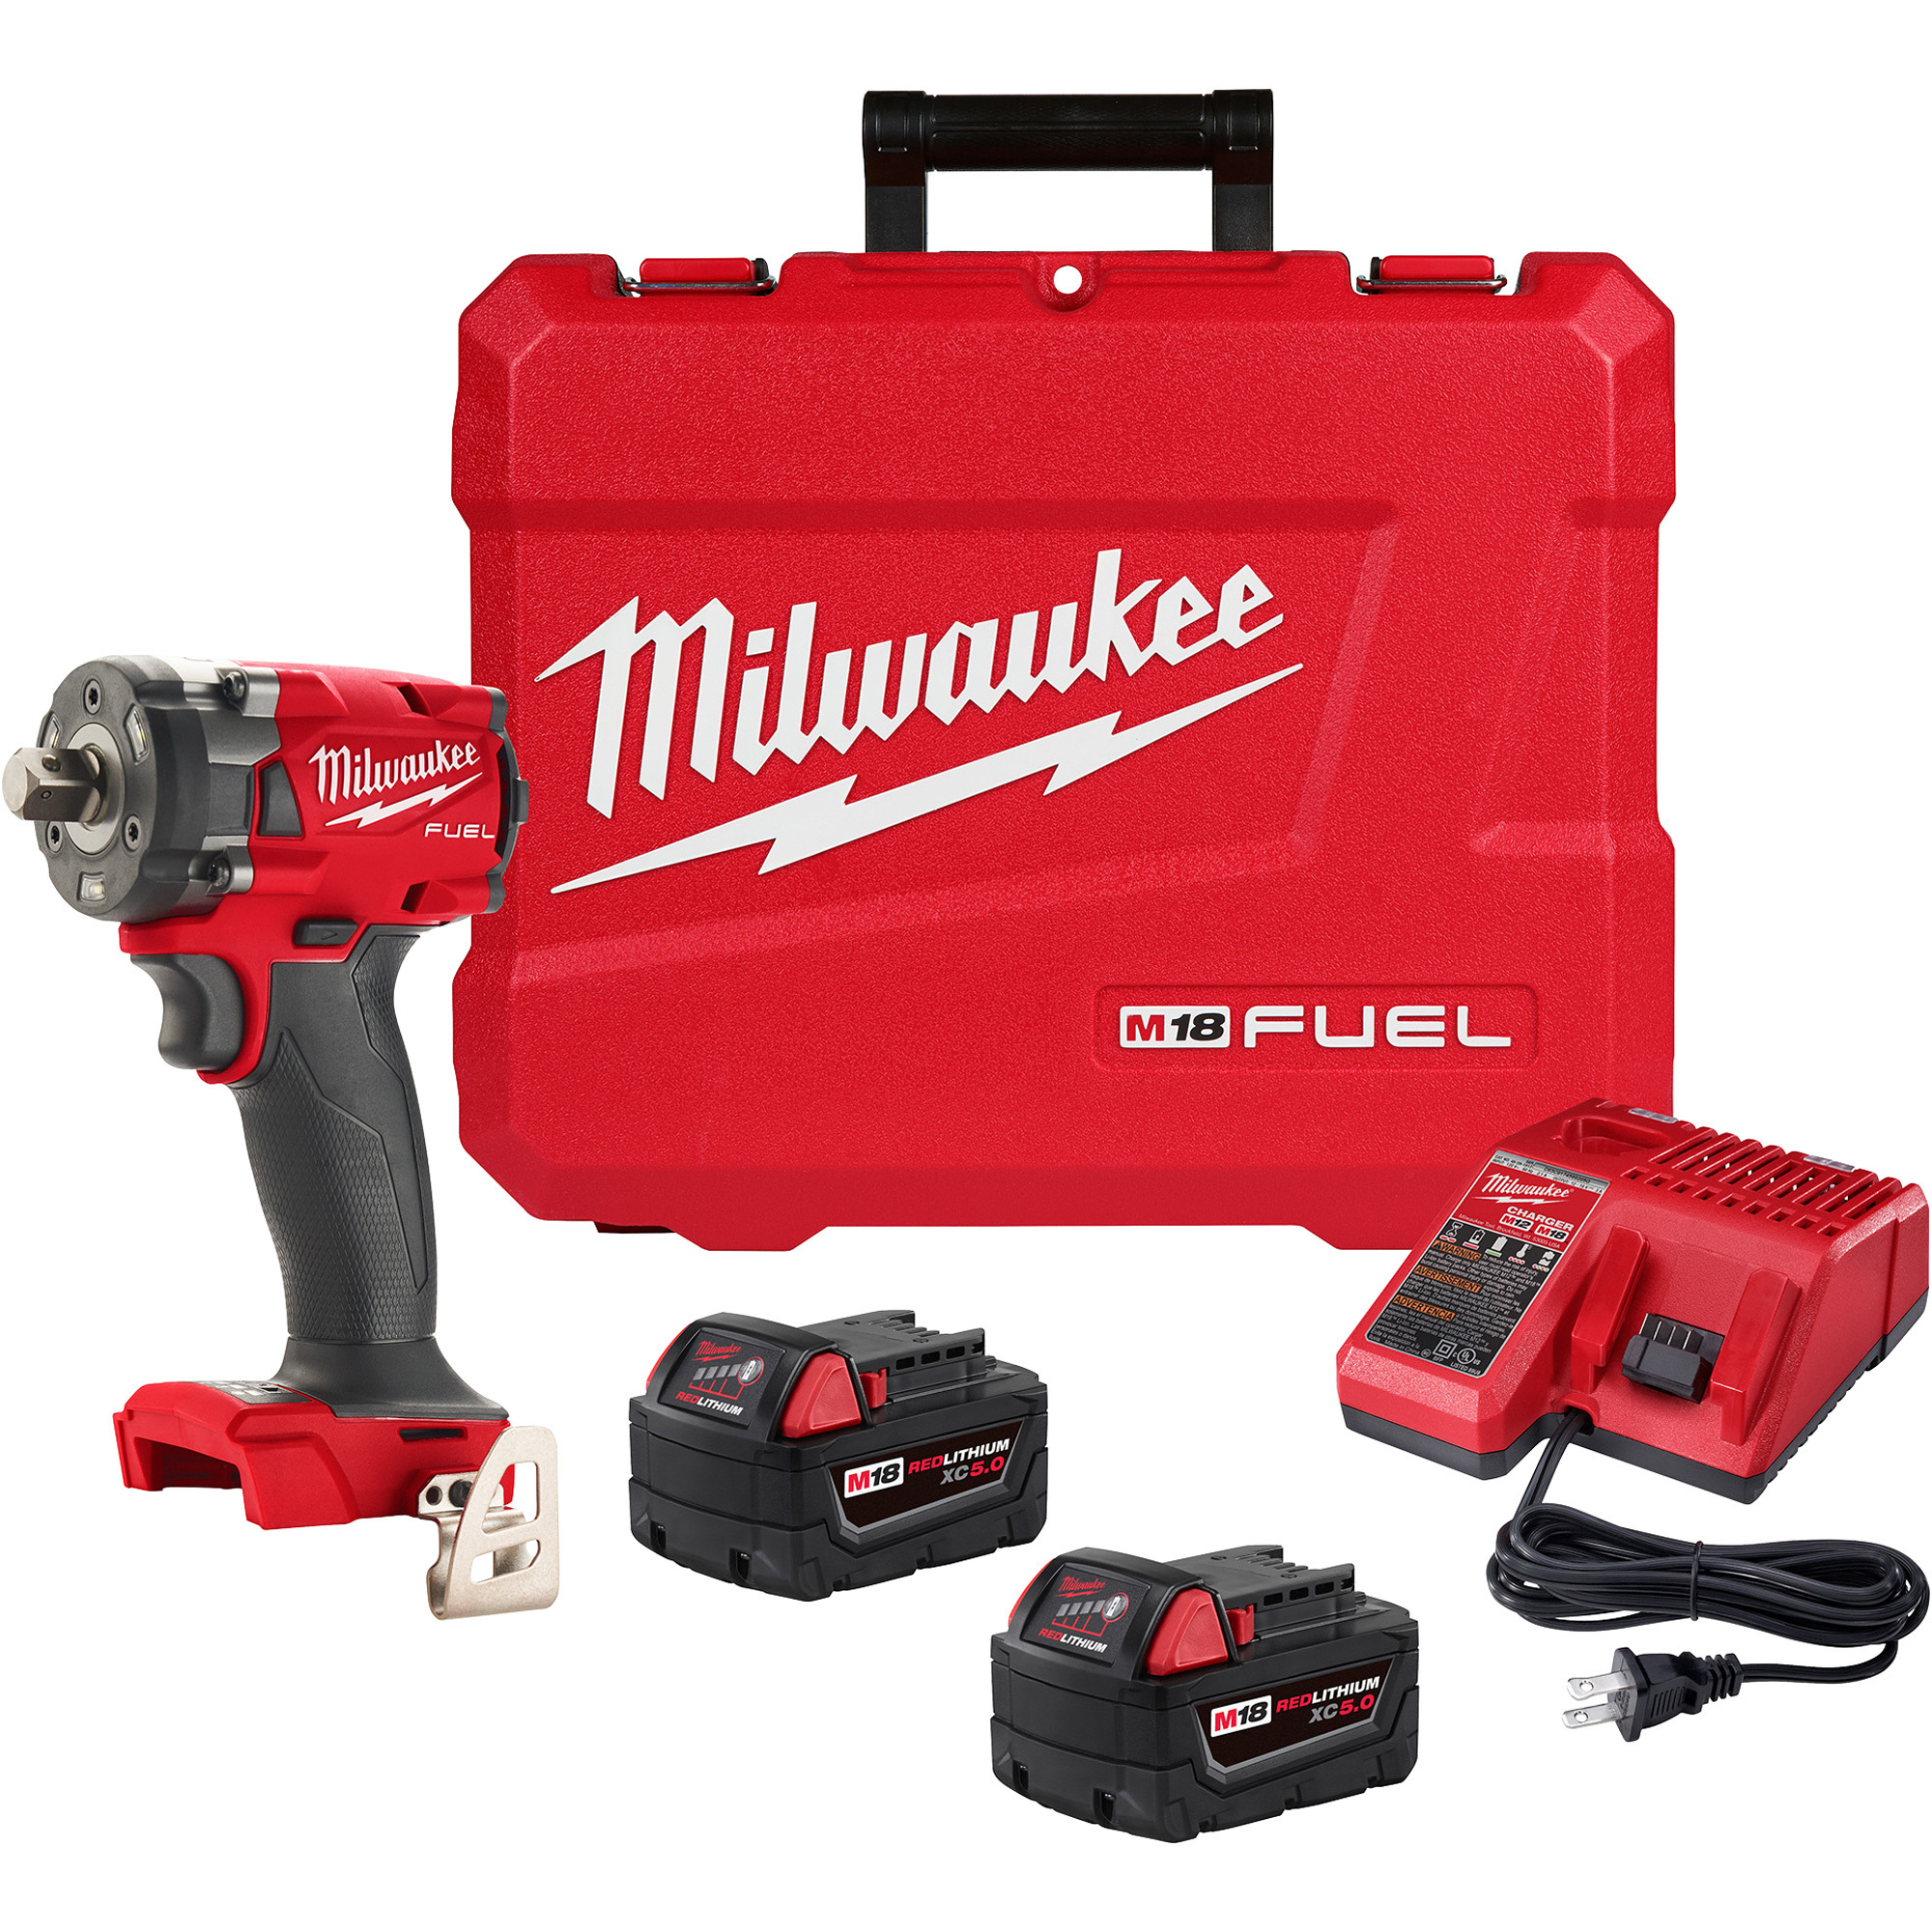 Milwaukee M18 FUEL Compact Impact Wrench with Pin Detent Kit, 1/2Inch Drive, 250 Ft./Lbs. Torque, Model 2855P-22R